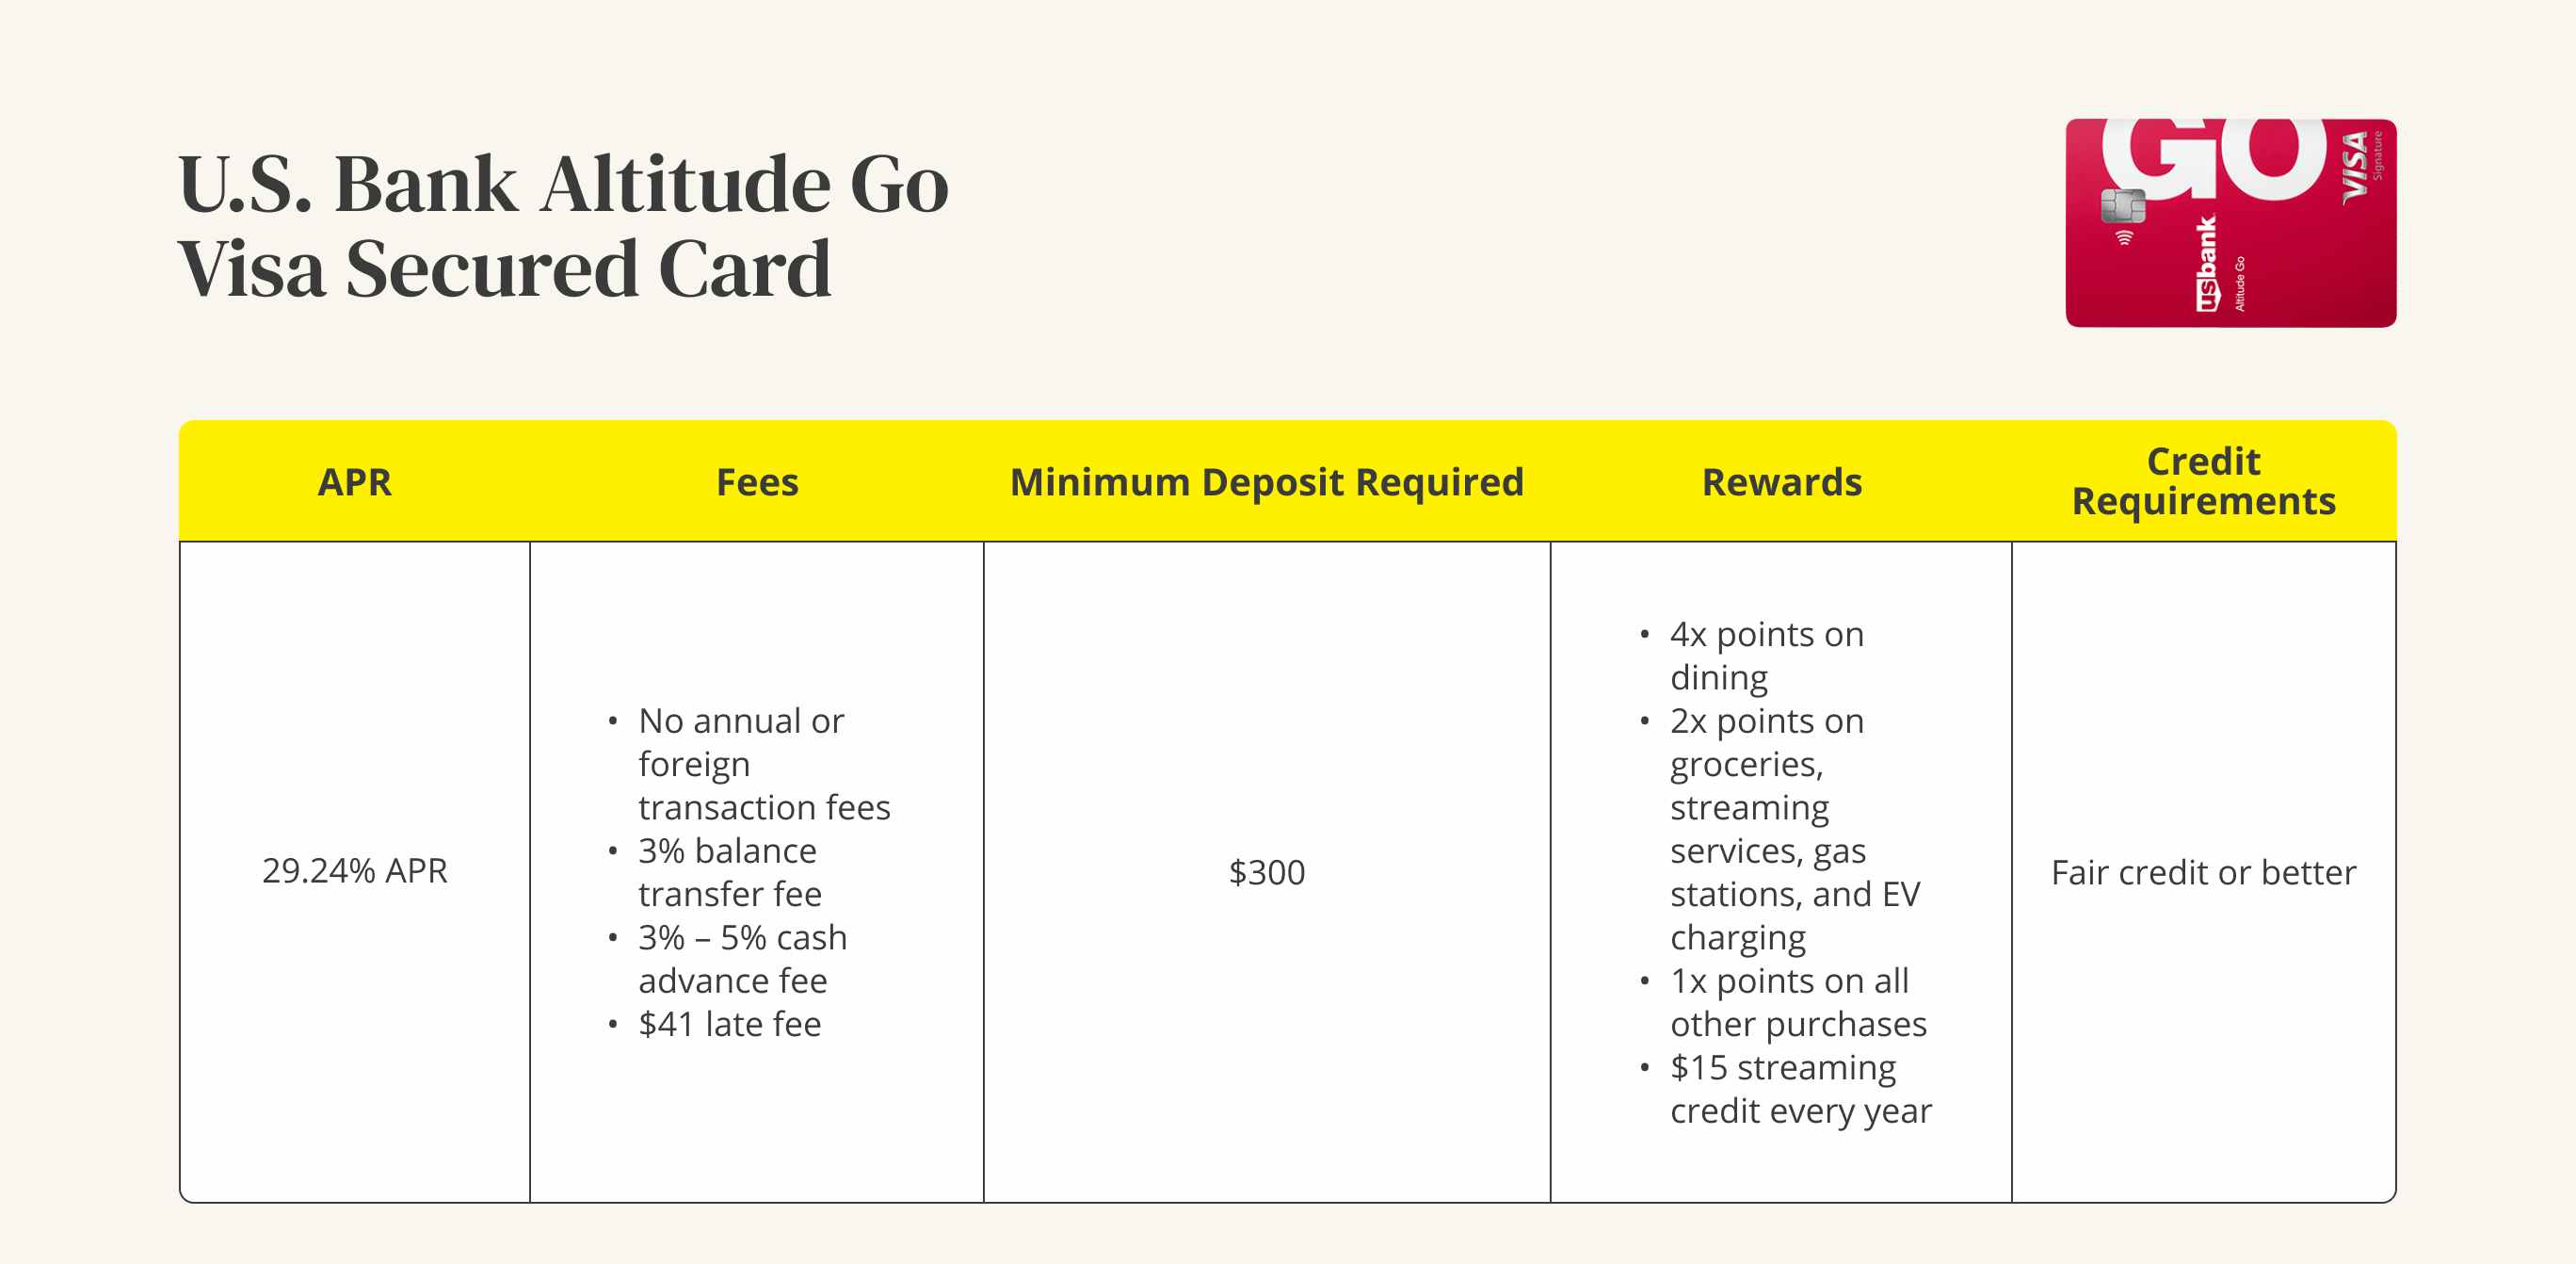 A graphic showing the APR, fees, minimum deposit, rewards, and credit requirements for a US Bank Altitude Go Visa Secured credit card